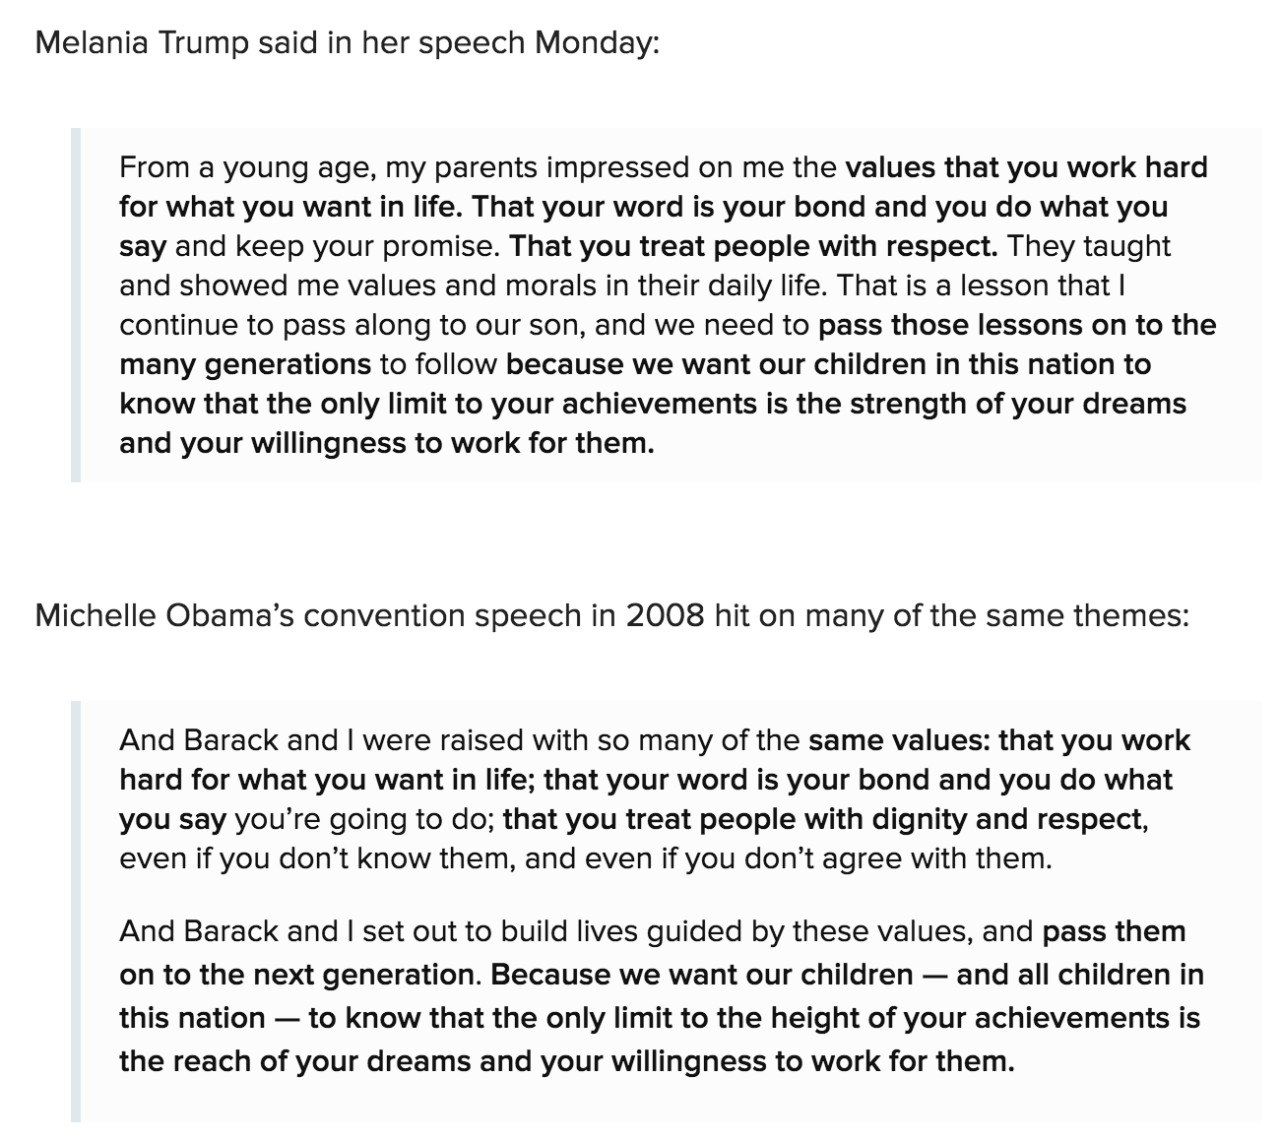 Melania Trump's Speech Appears To Have Plagiarized From Michelle Obama